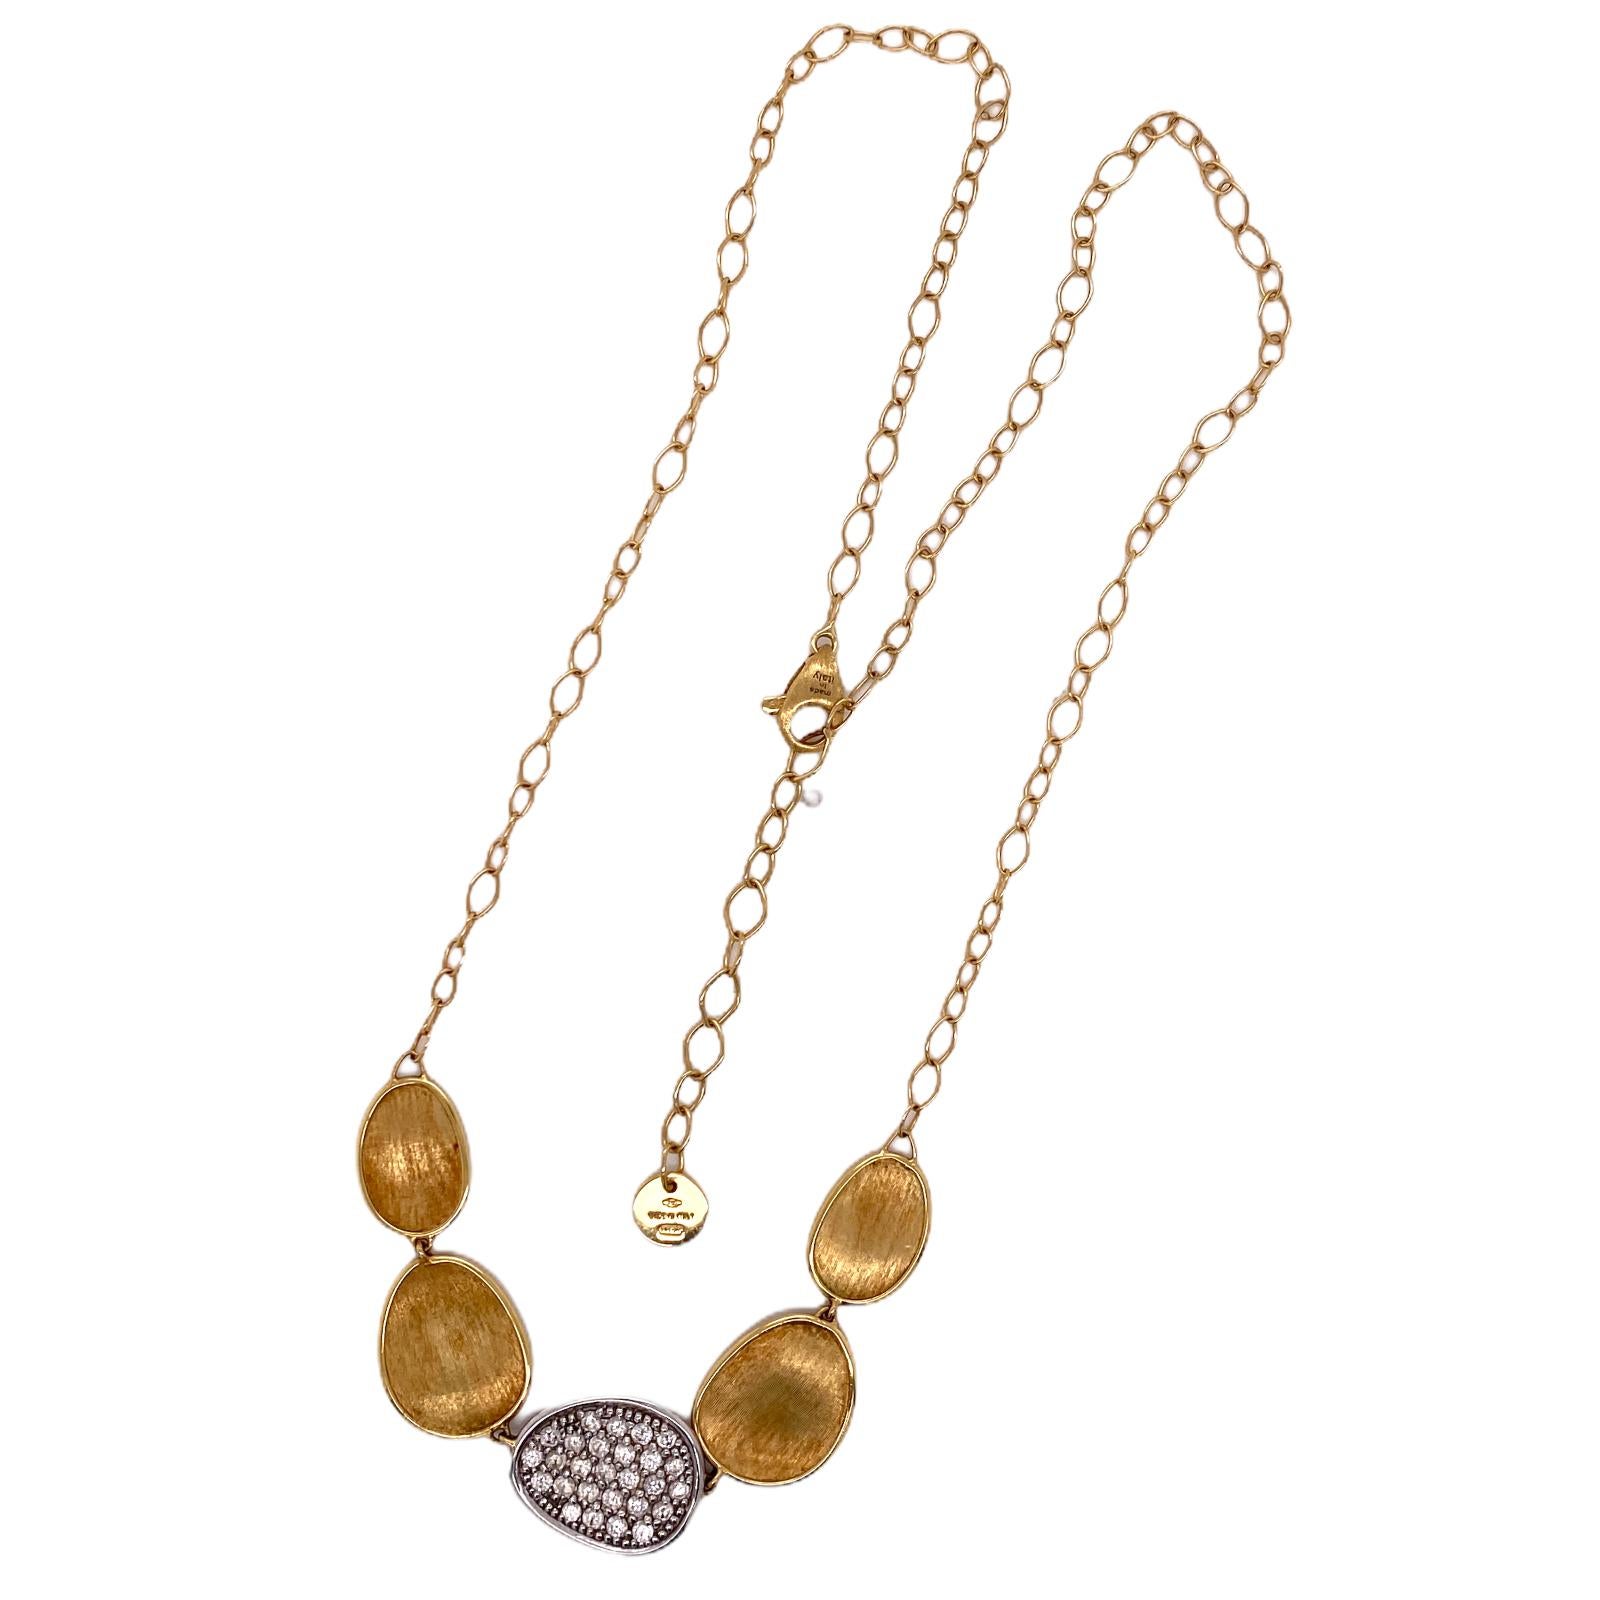 Stylish necklace by Italian Designer Marco Bicego. The necklace is part of the Lunaria collection. This 5 station necklace features a center pave diamond station weighing .53 carat total weight. The necklace measures 17 inches in length, but can be